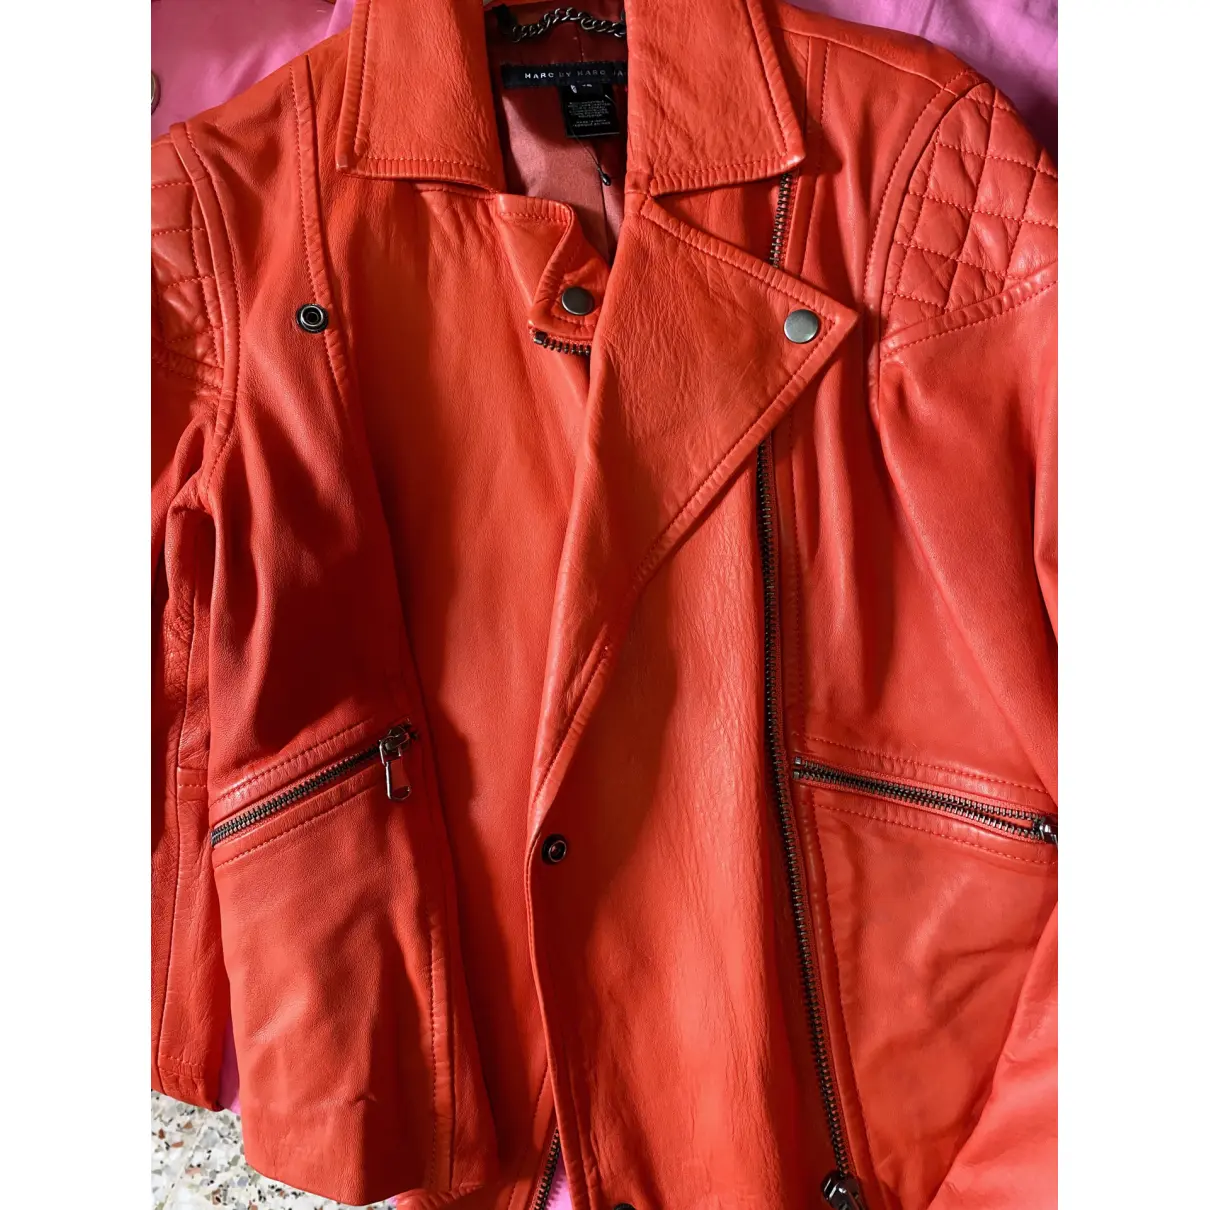 Leather jacket Marc by Marc Jacobs